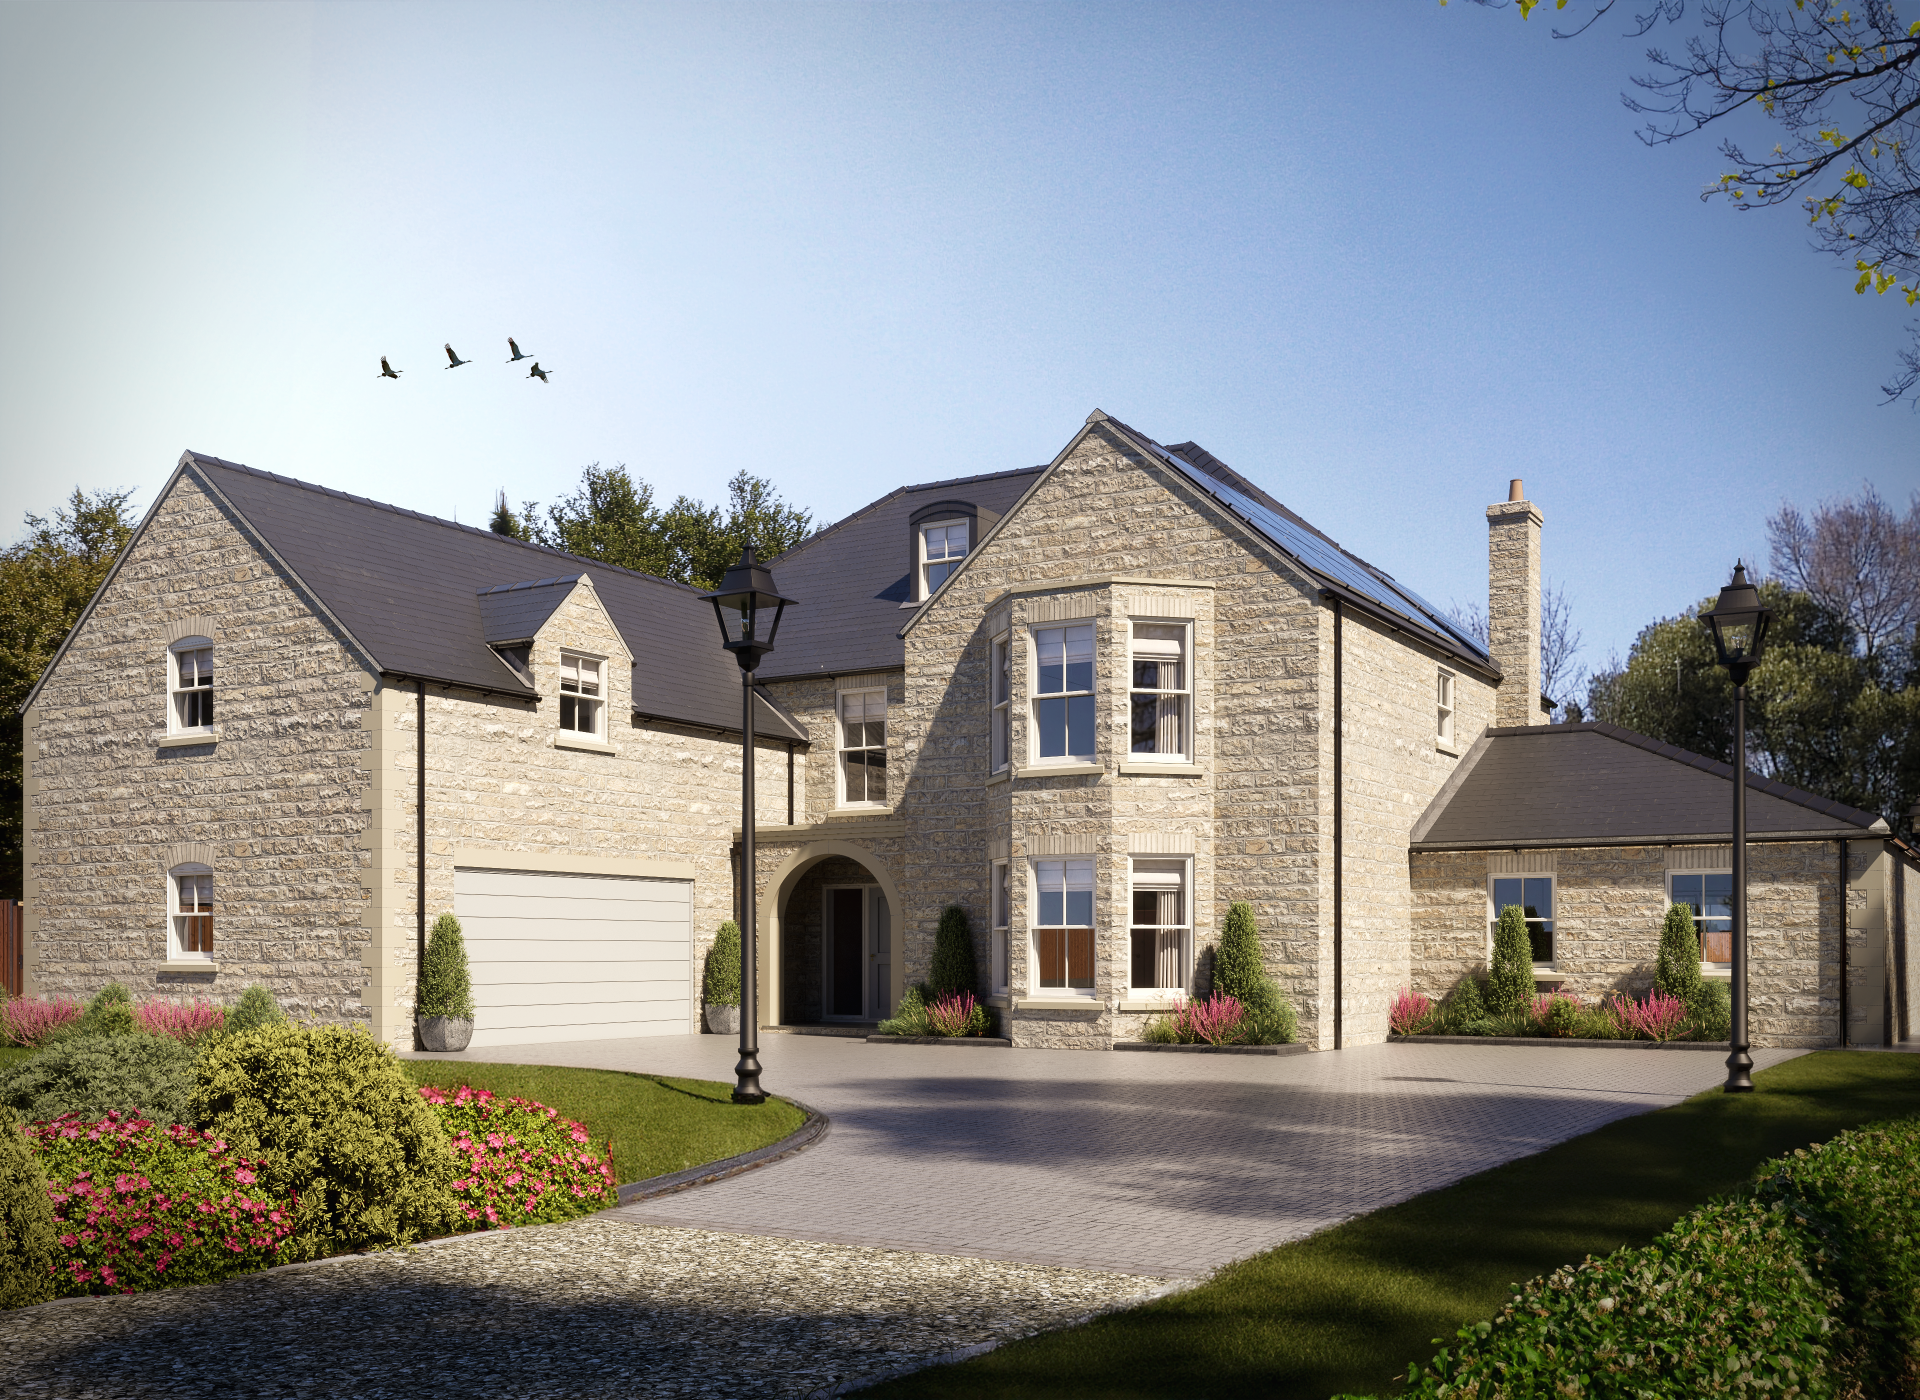 A stunning new self-build home uniquely designed to our clientâ€™s needs